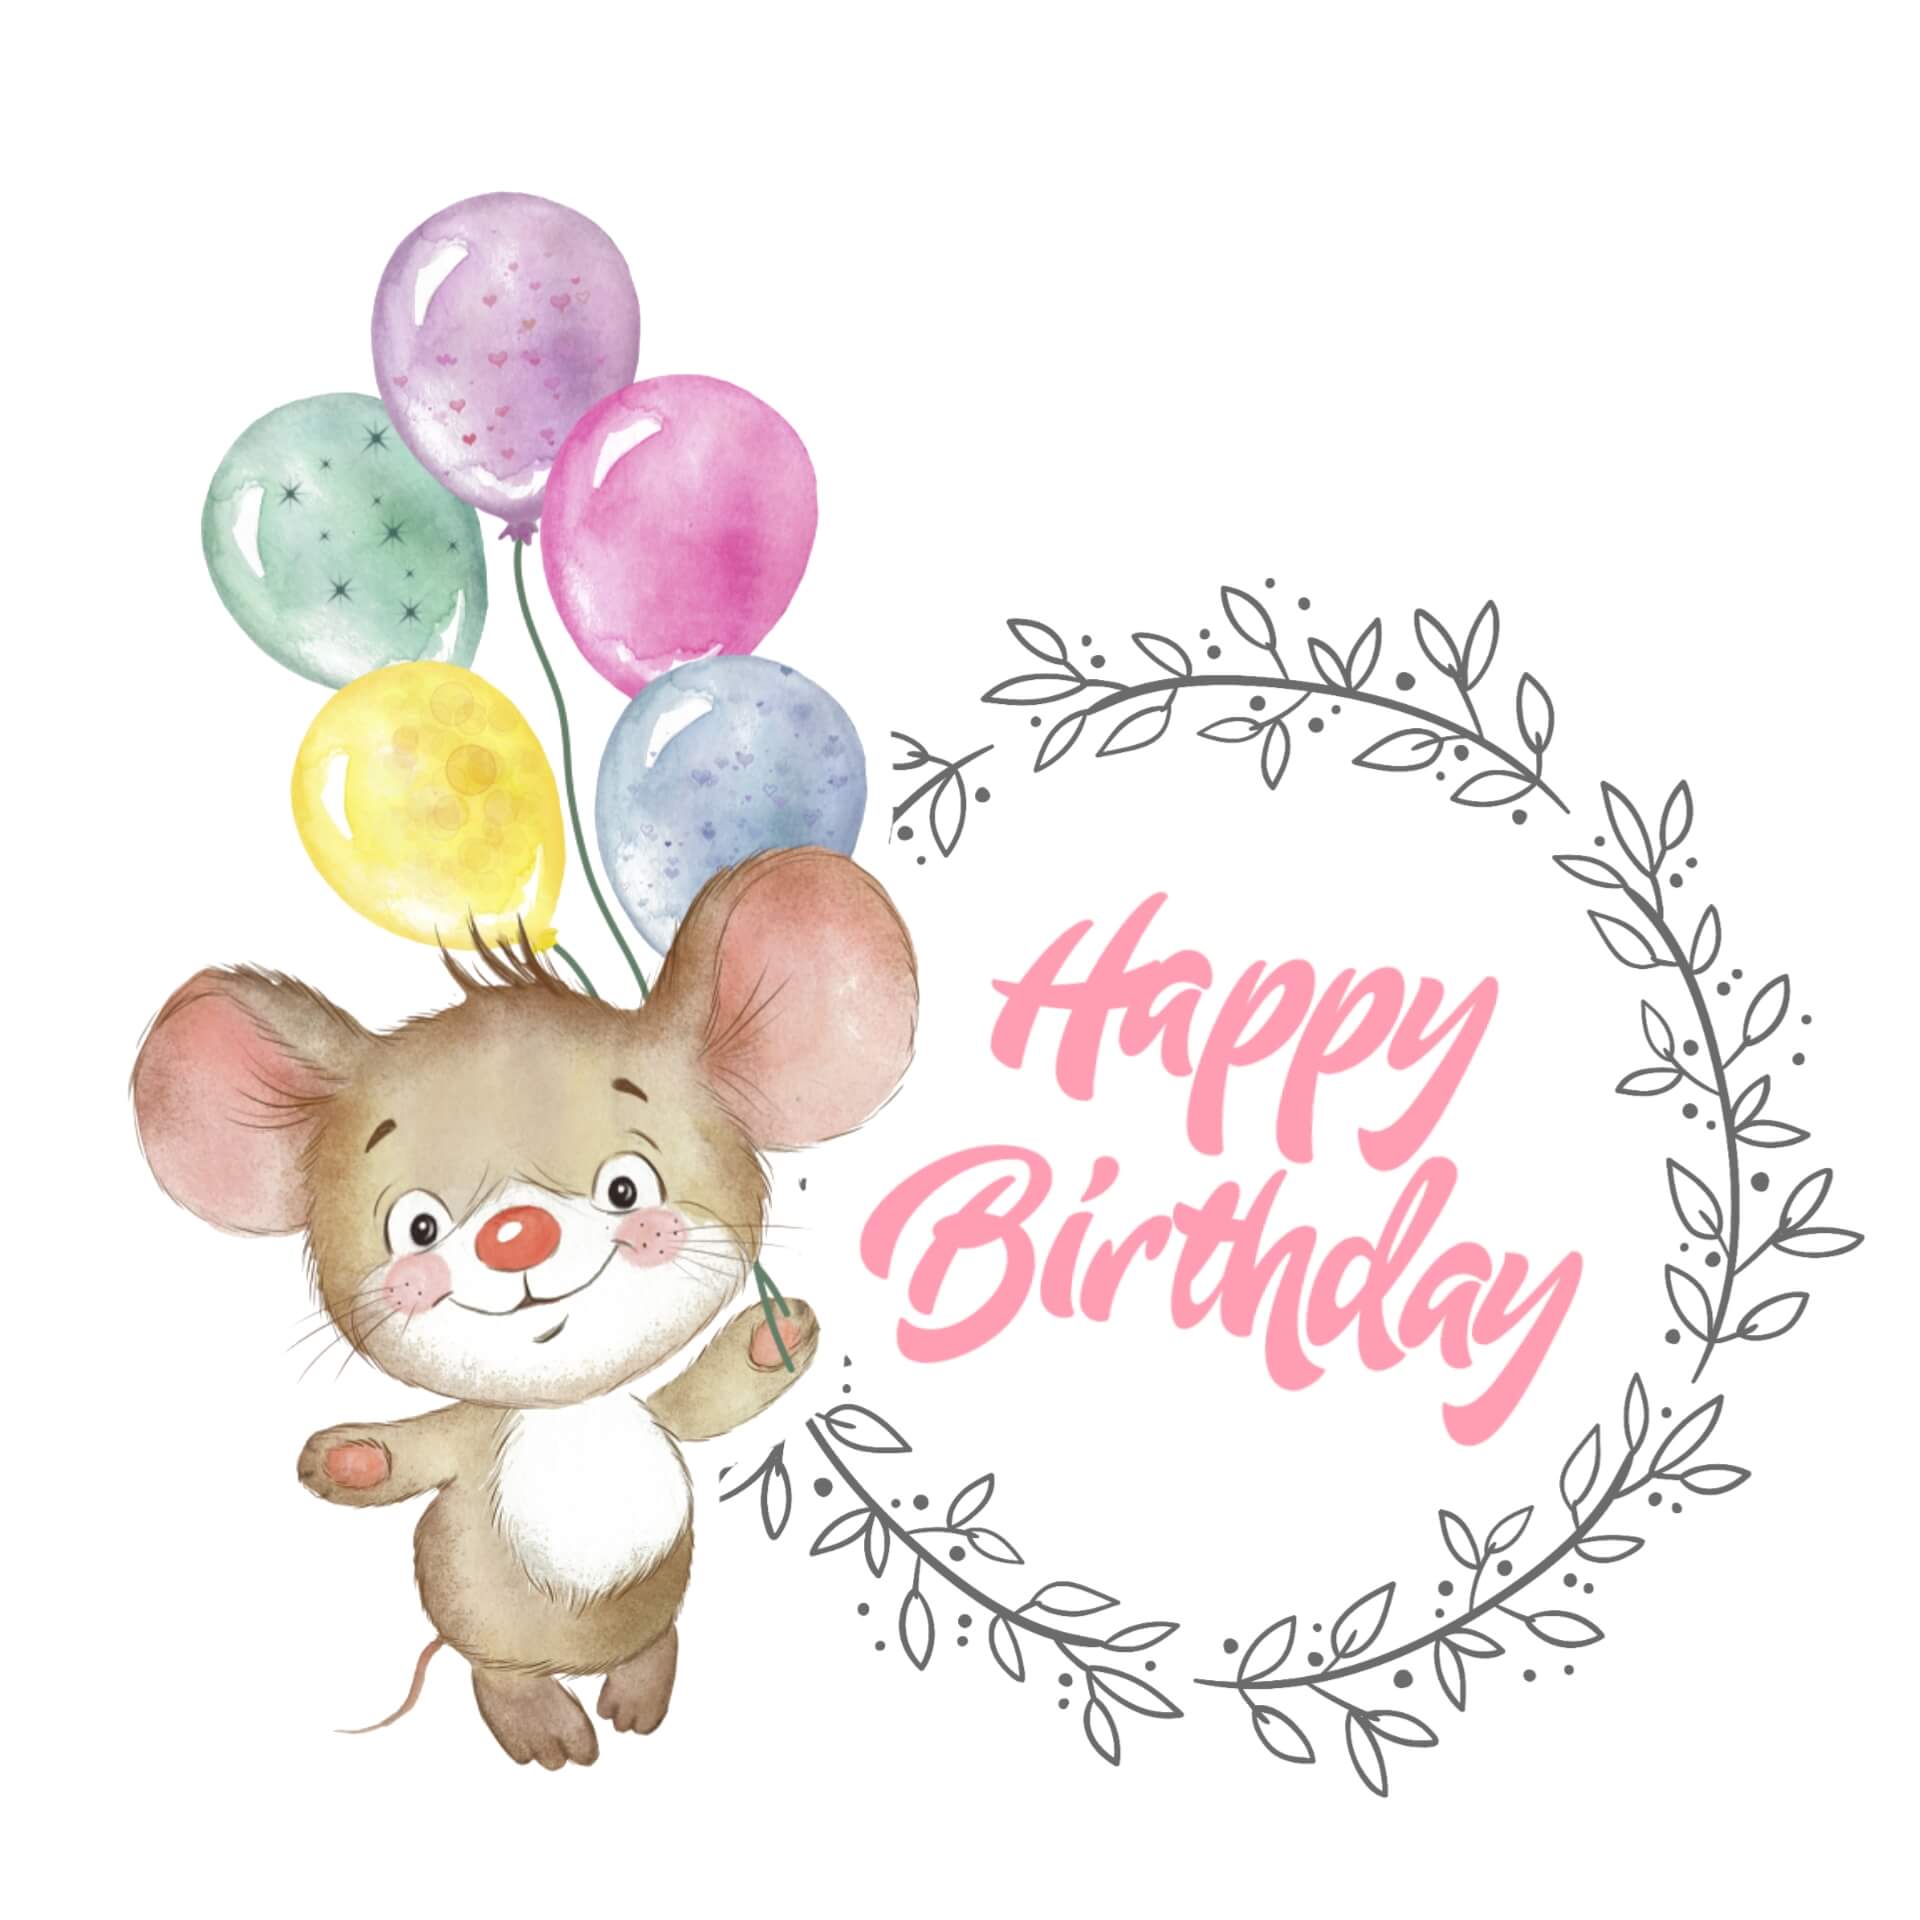 Cute Happy Birthday Images